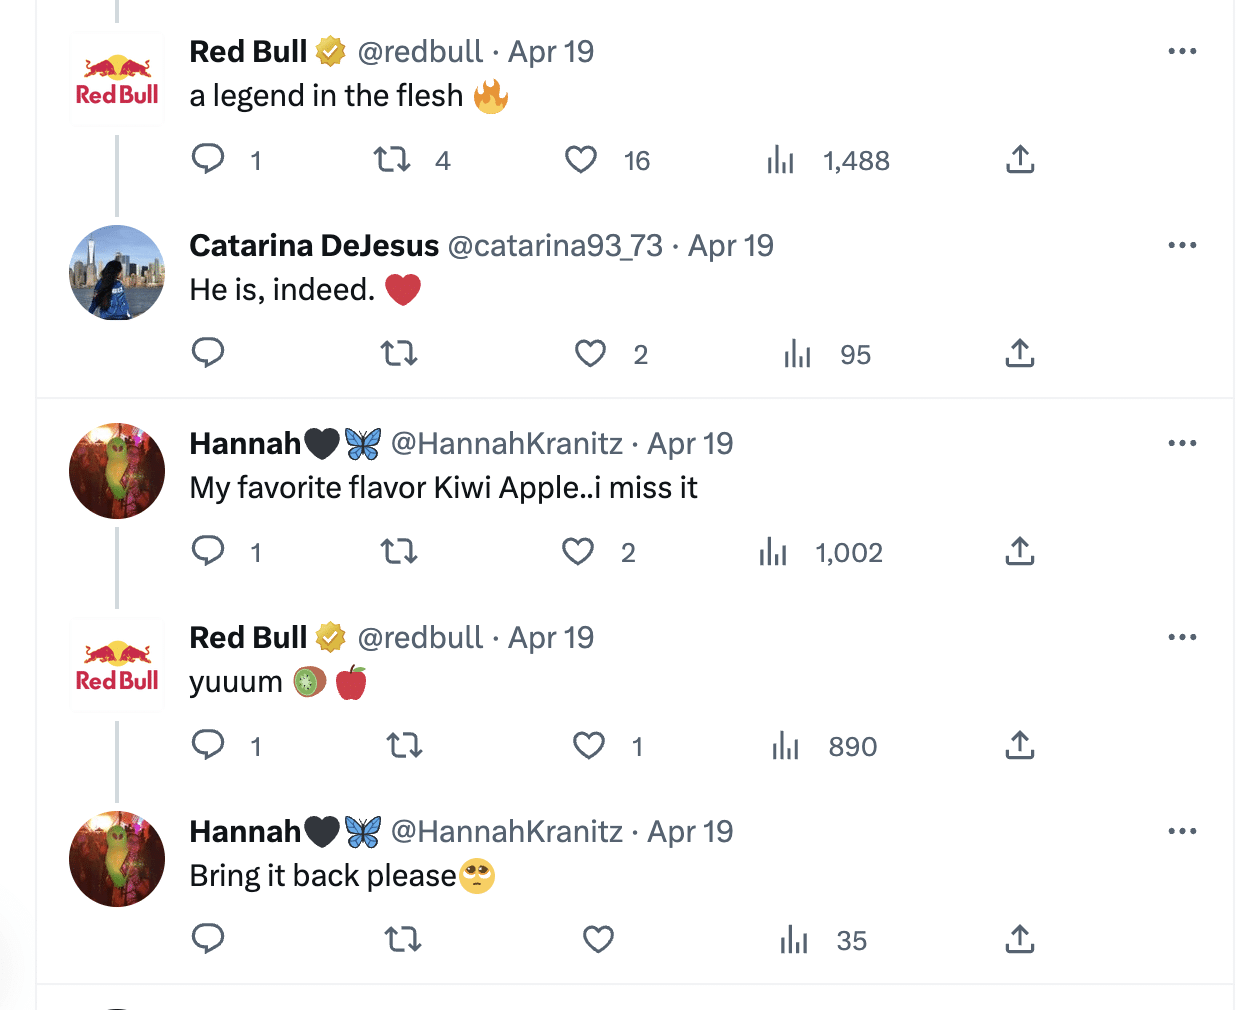 Replies from Red Bull's Twitter social media account to some comments from followers